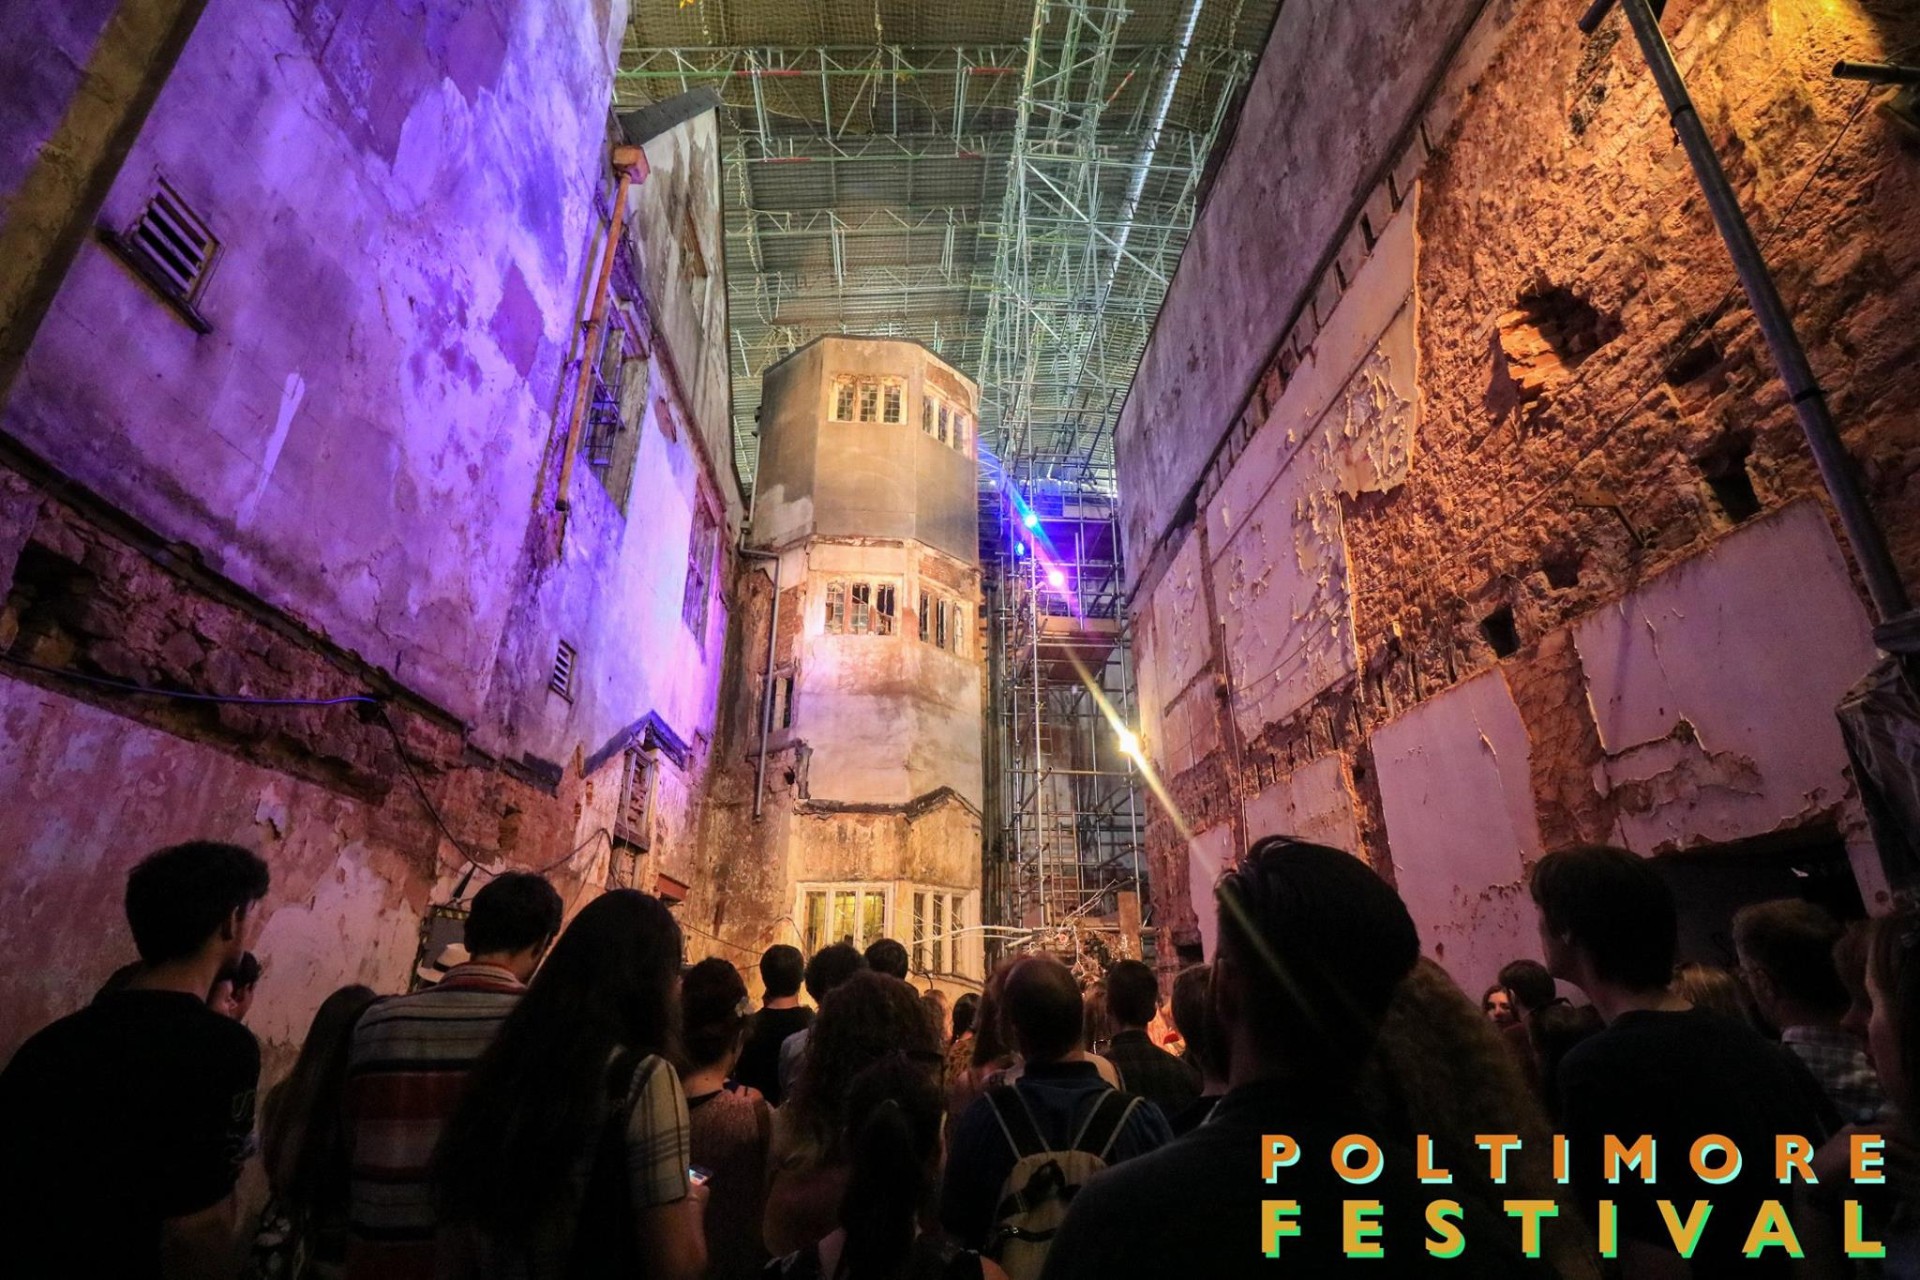 Poltimore Festival Exeter University Devon derelict building purple and orange lights crowd of people watching a gig concert live music How to Get Into Marketing with an English Degree